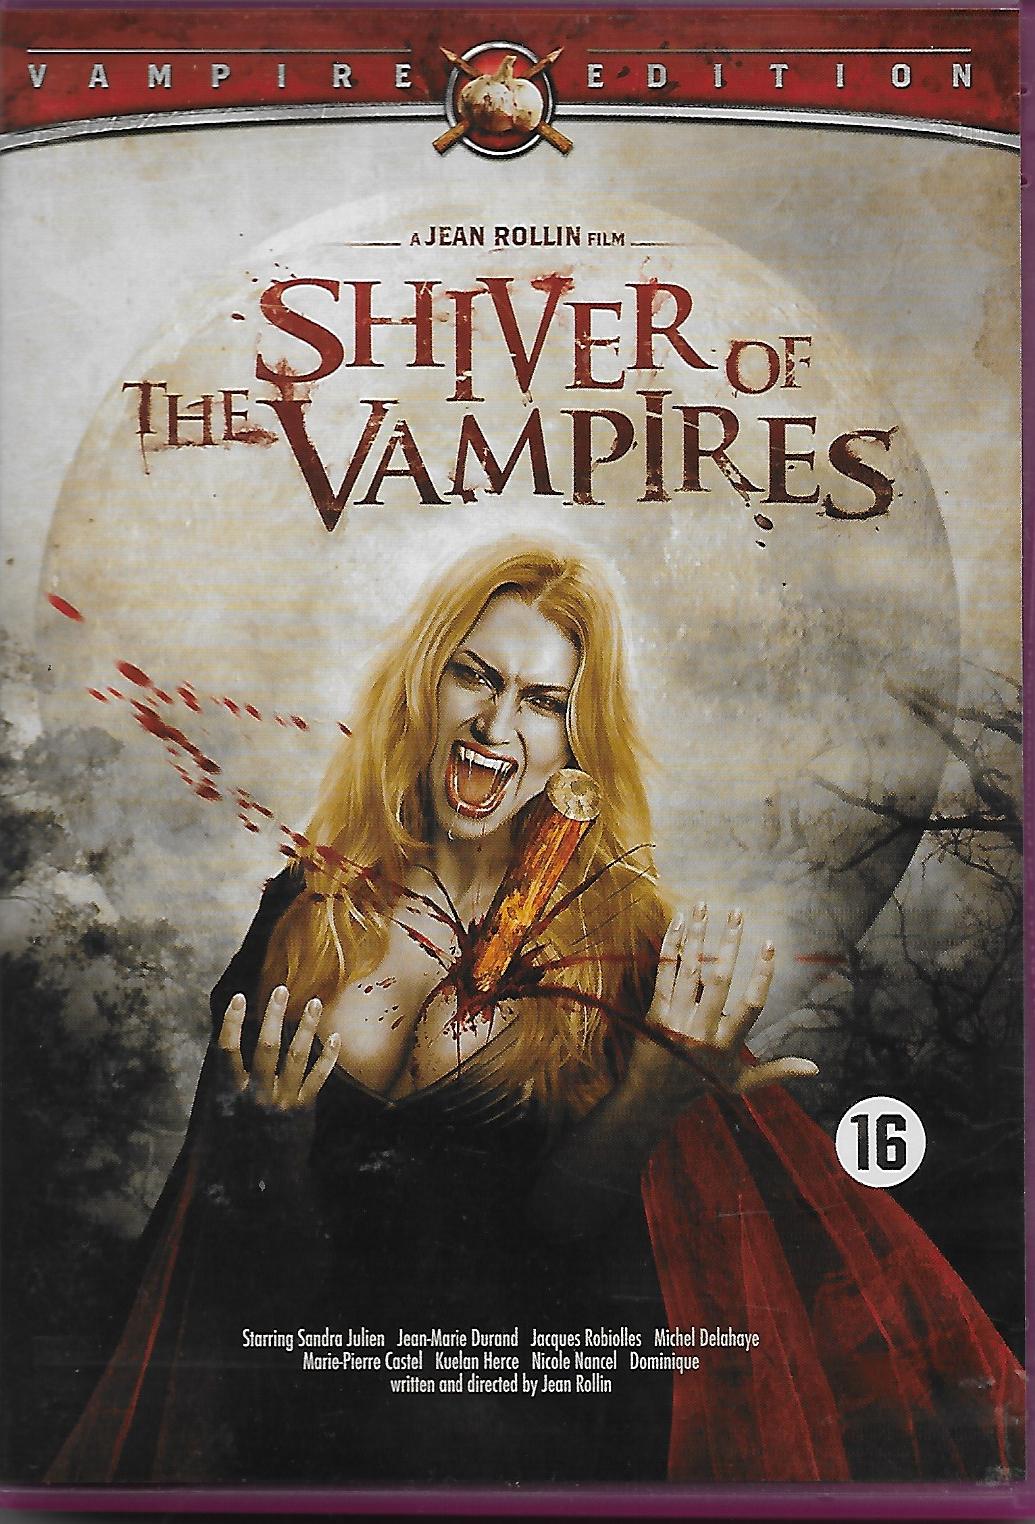 Shiver of the vampires